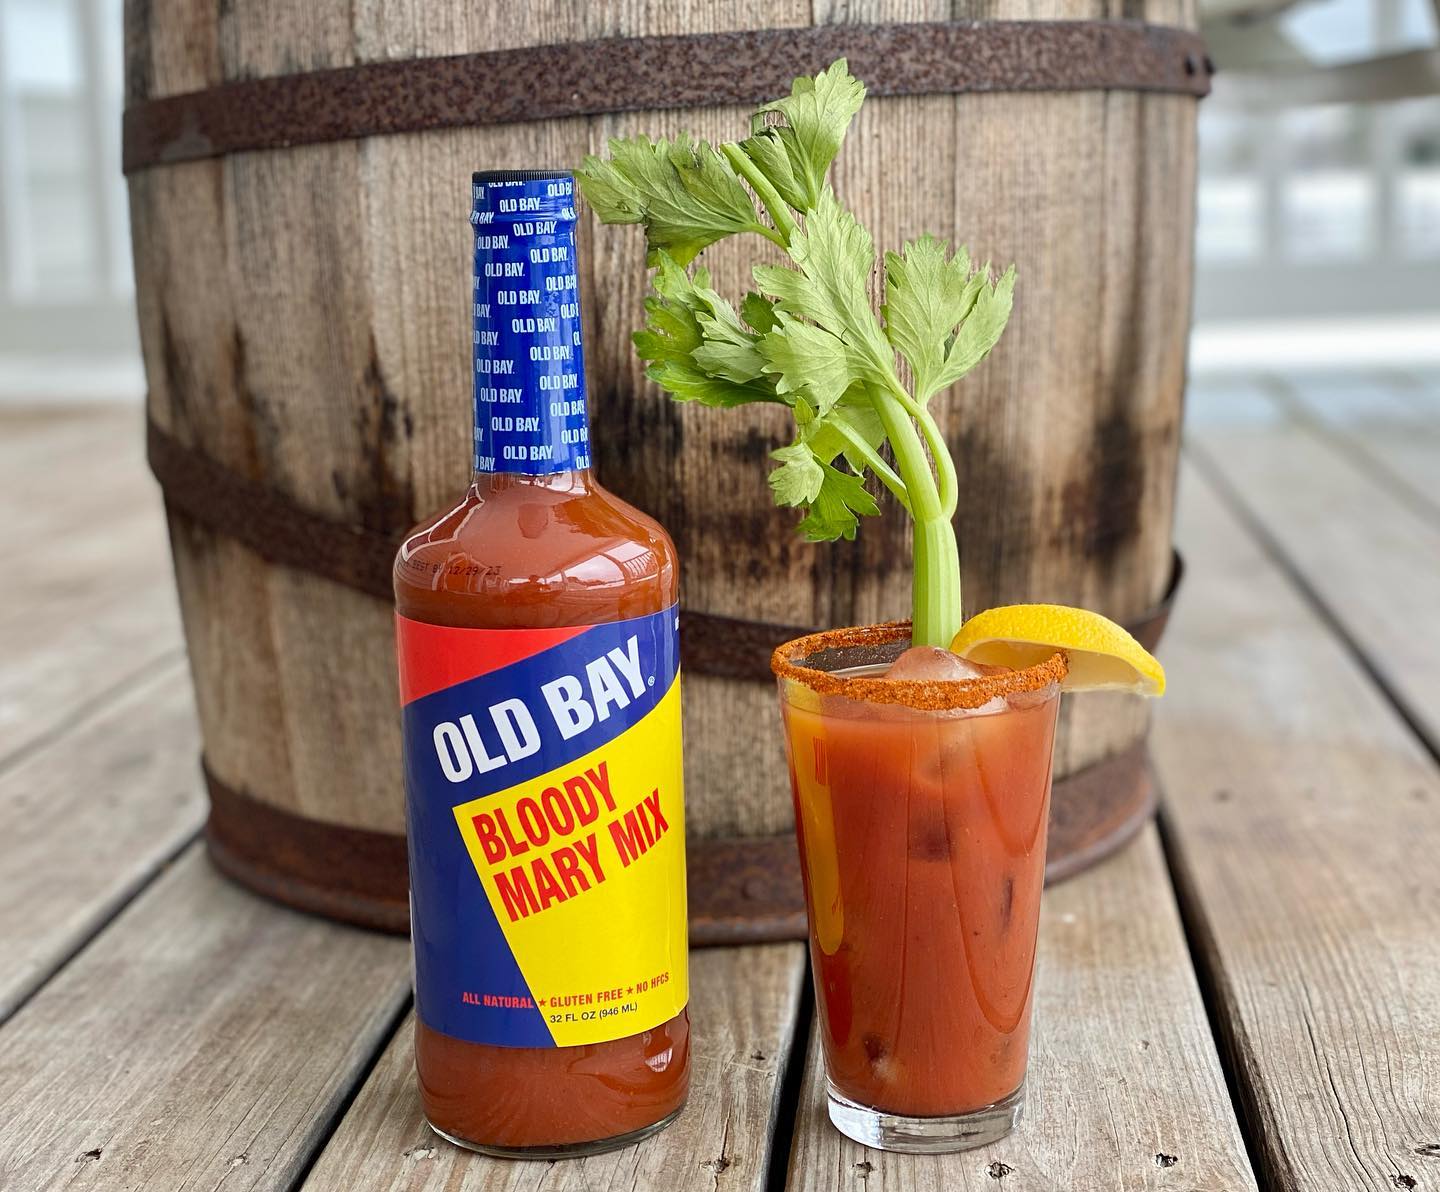 George's OLD BAY Bloody Mary mix and cocktail